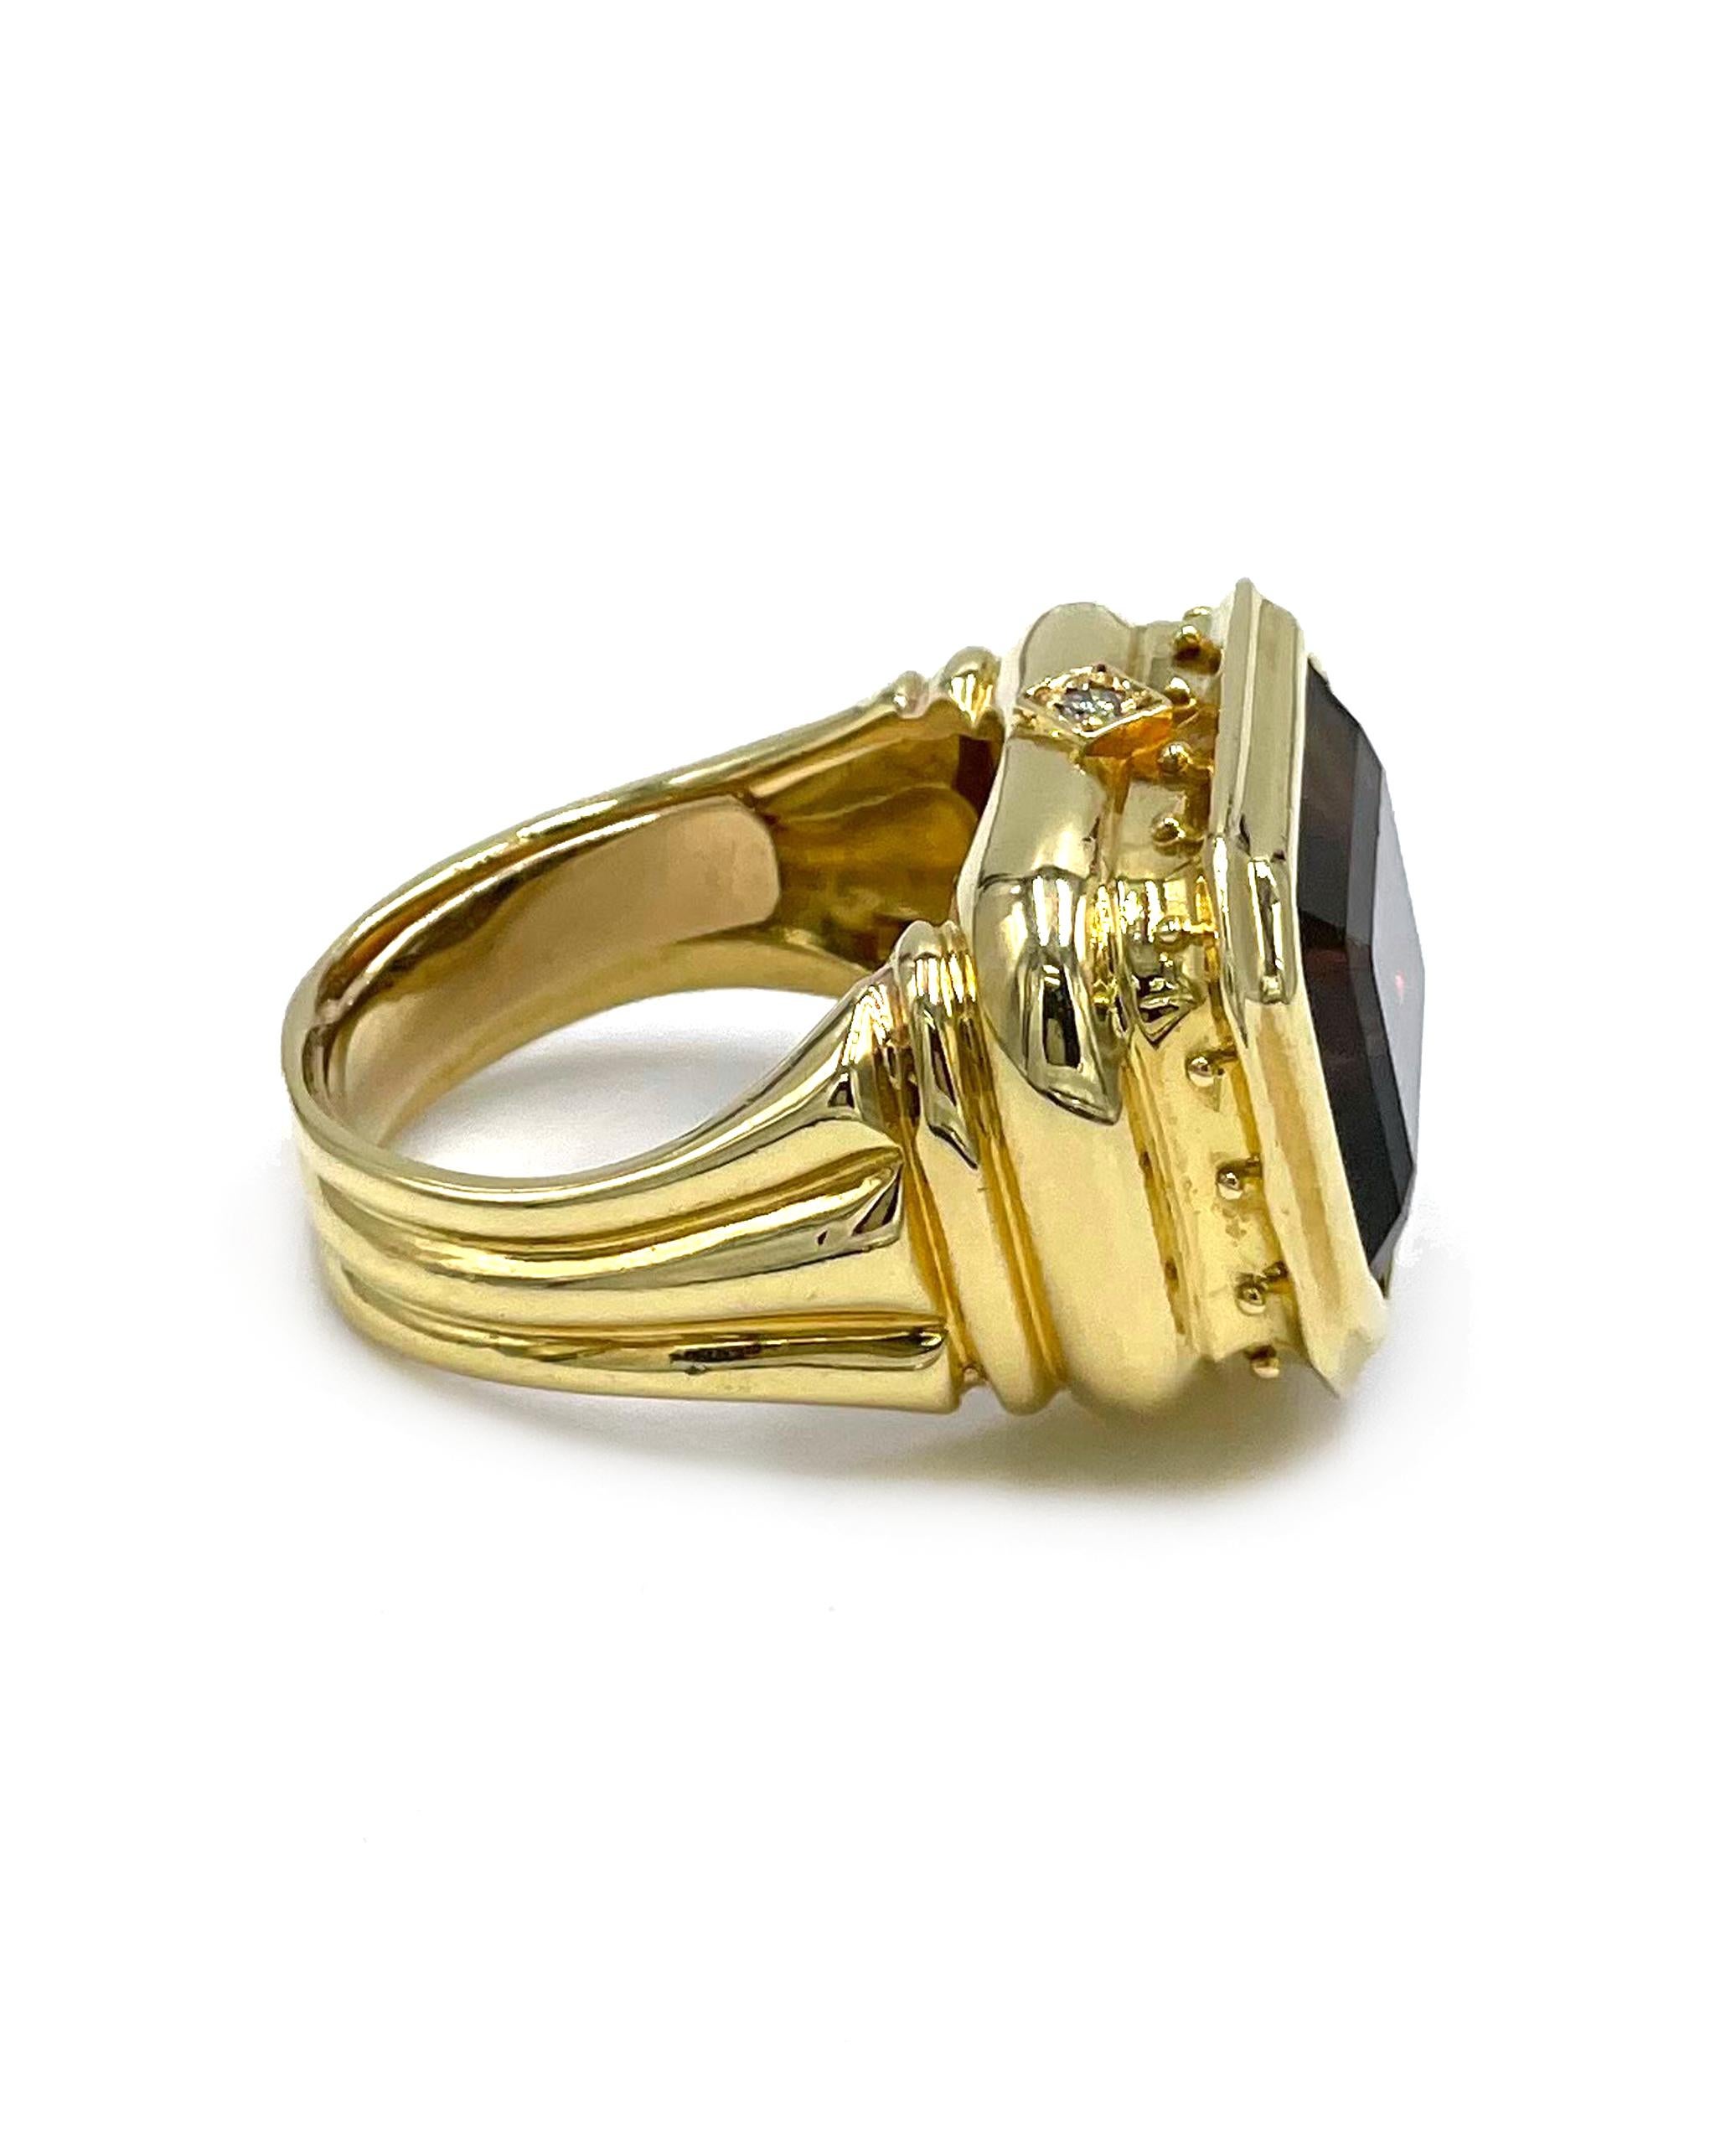 Circa 1990s. 18K yellow gold right hand ring with one emerald cut smoky topaz measuring approximately 15.00mm x 11.85mm and two round diamonds weighing approximately 0.03 carat.

- Slight wear and tear 
- Finger size 8
- Ribbed detailing through